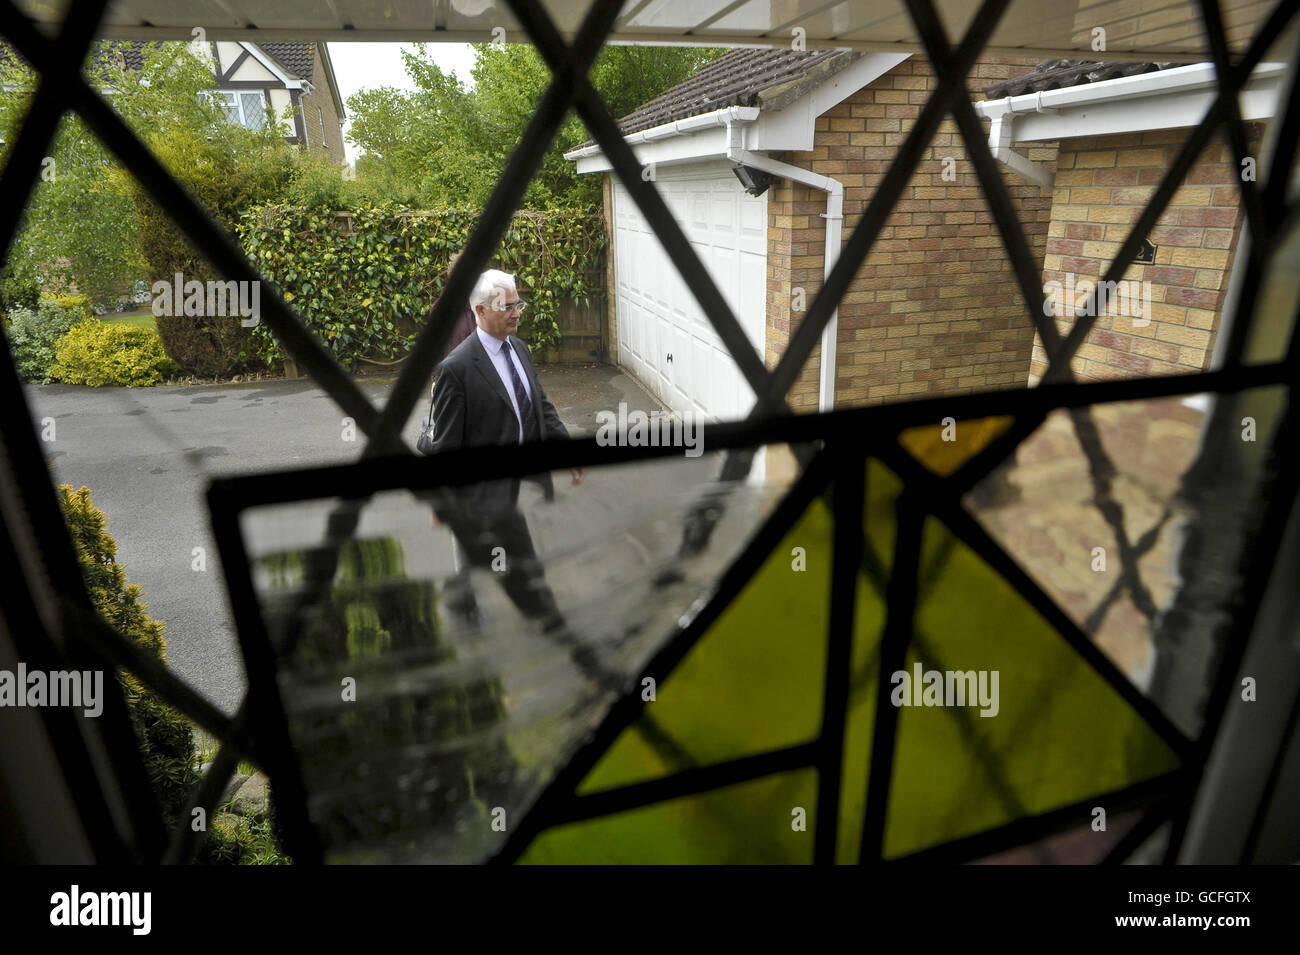 Chancellor Alistair Darling is pictured through a leaded glass window as he arrives at the home of a Labour supporter to discuss issues facing the voters of in the forthcoming General Election in Kingswood, Bristol. Stock Photo